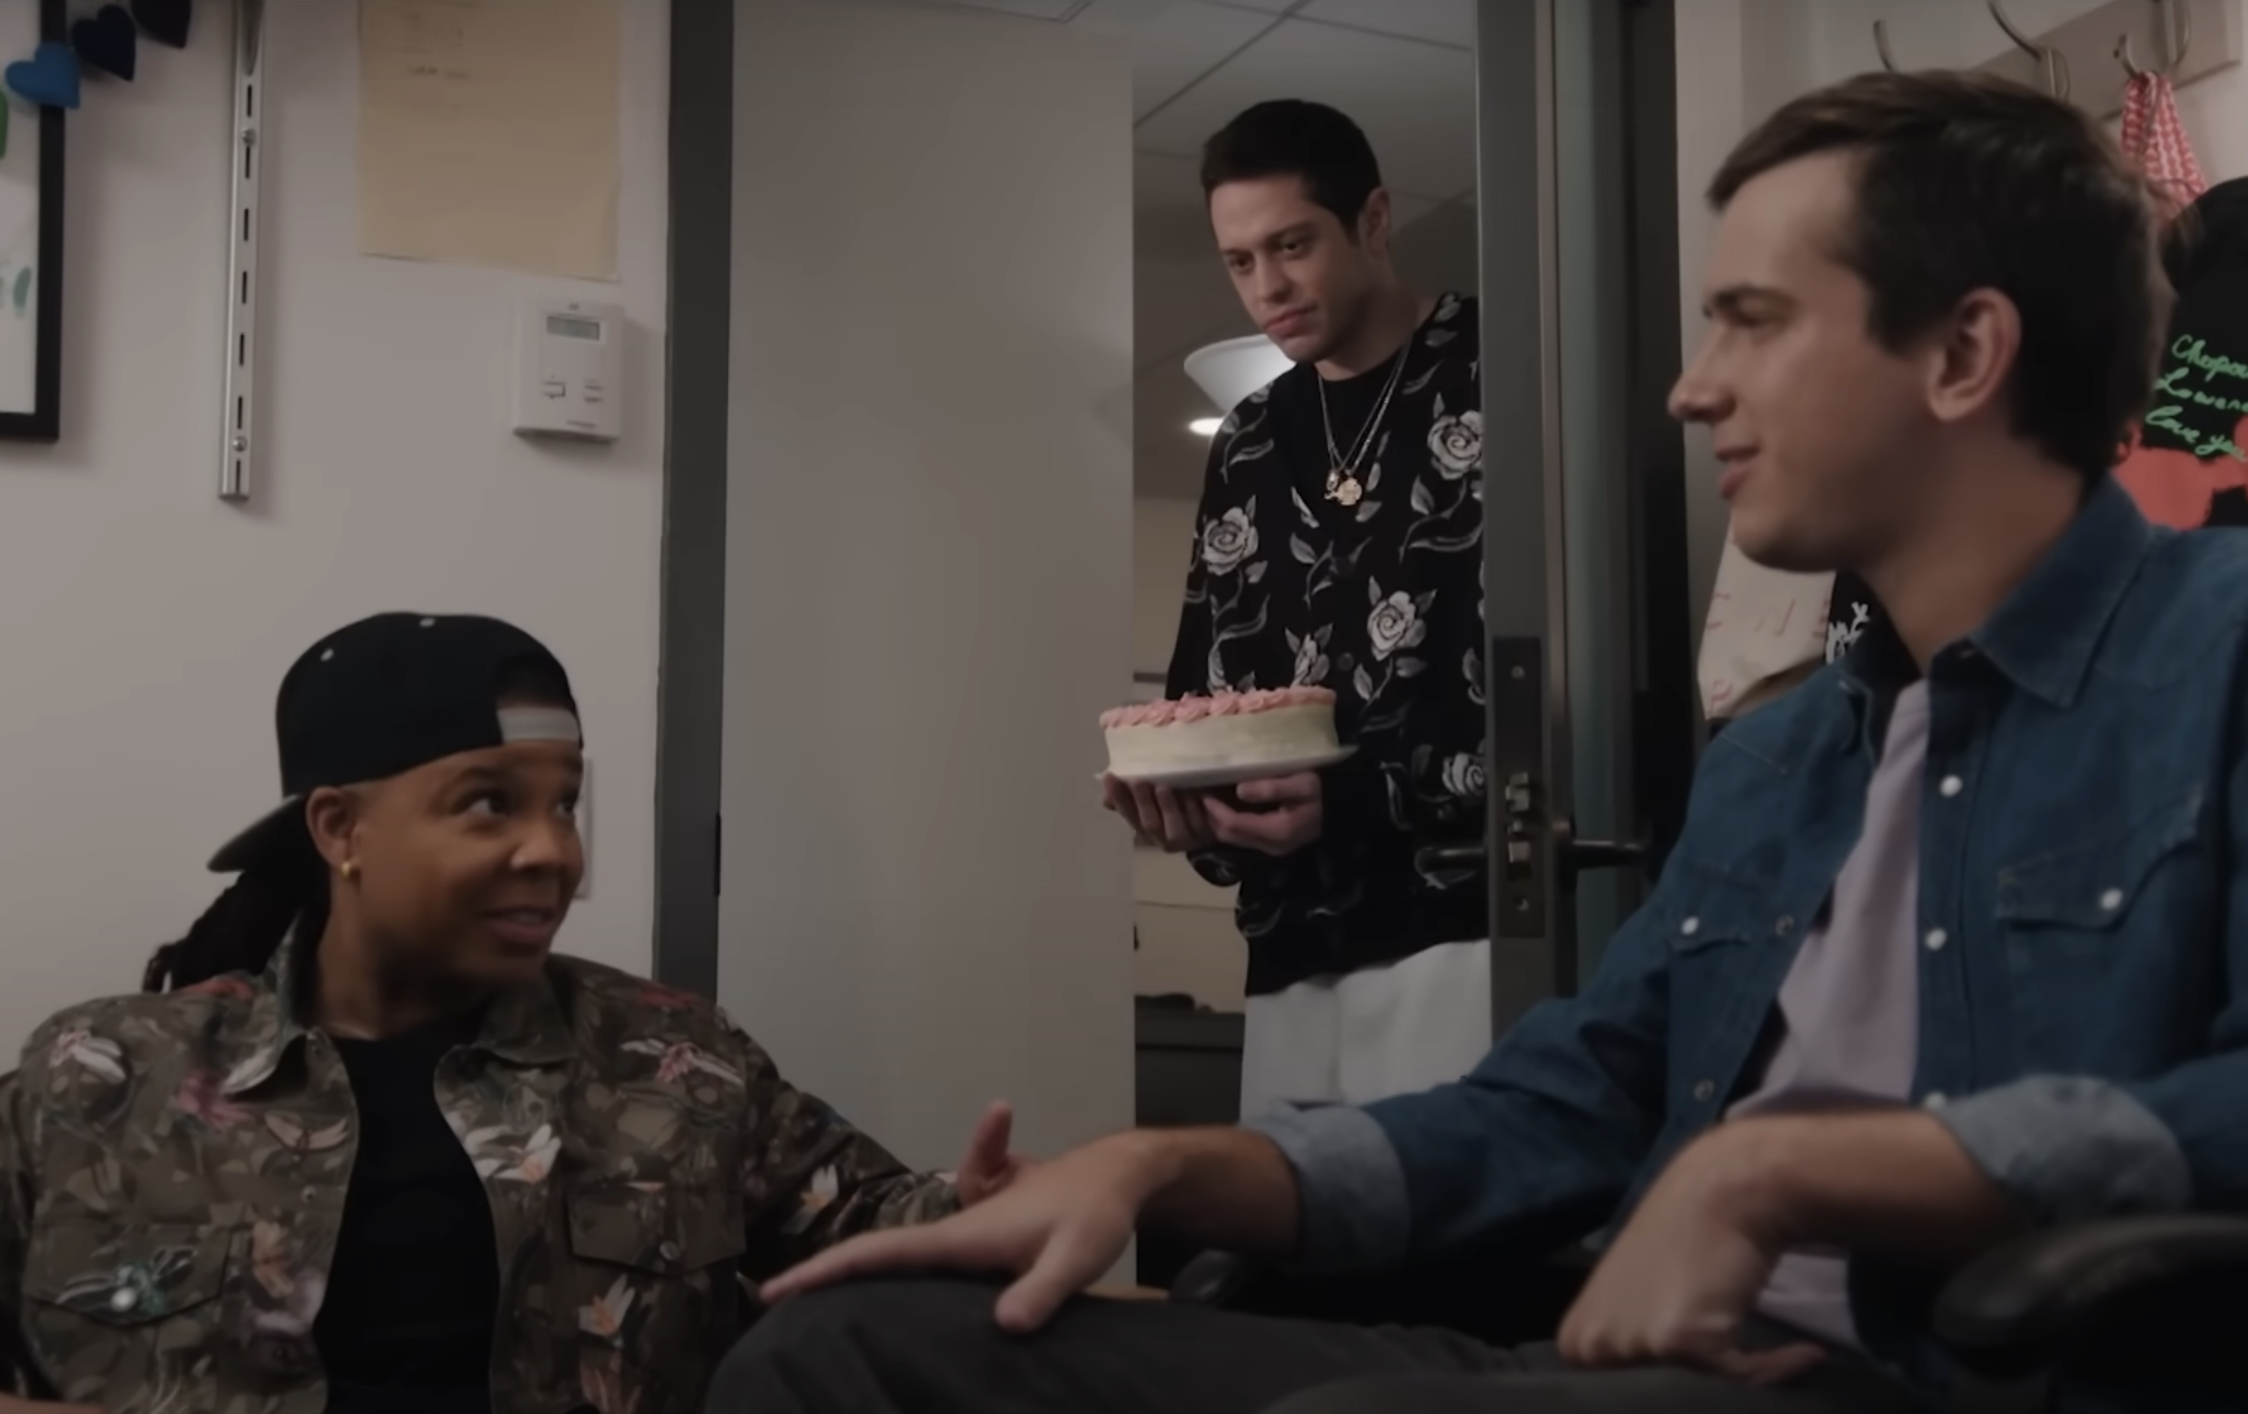 Pete holding a cake in a doorway and looking on at two people talking